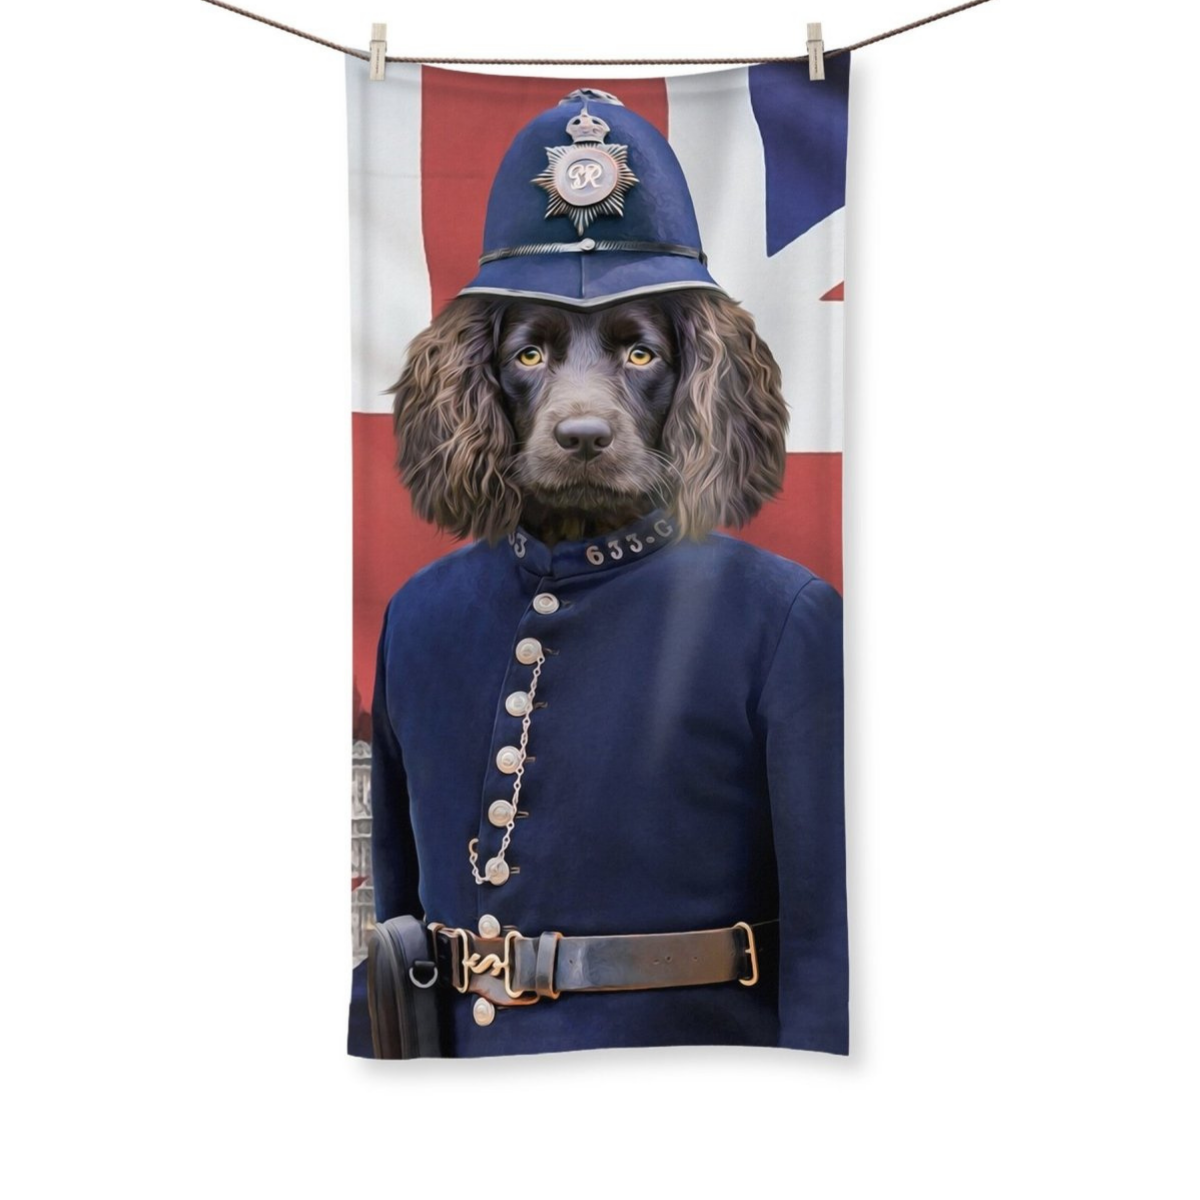  The British Police Officer: Custom Pet Towel  - Paw & Glory - #pet portraits# - #dog portraits# - #pet portraits uk#Paw & Glory, paw and glory, nasa dog portrait, funny dog paintings, draw your pet portrait, hogwarts dog houses, animal portrait pictures, personalized pet portrait, Pet portraits,pet art Towel